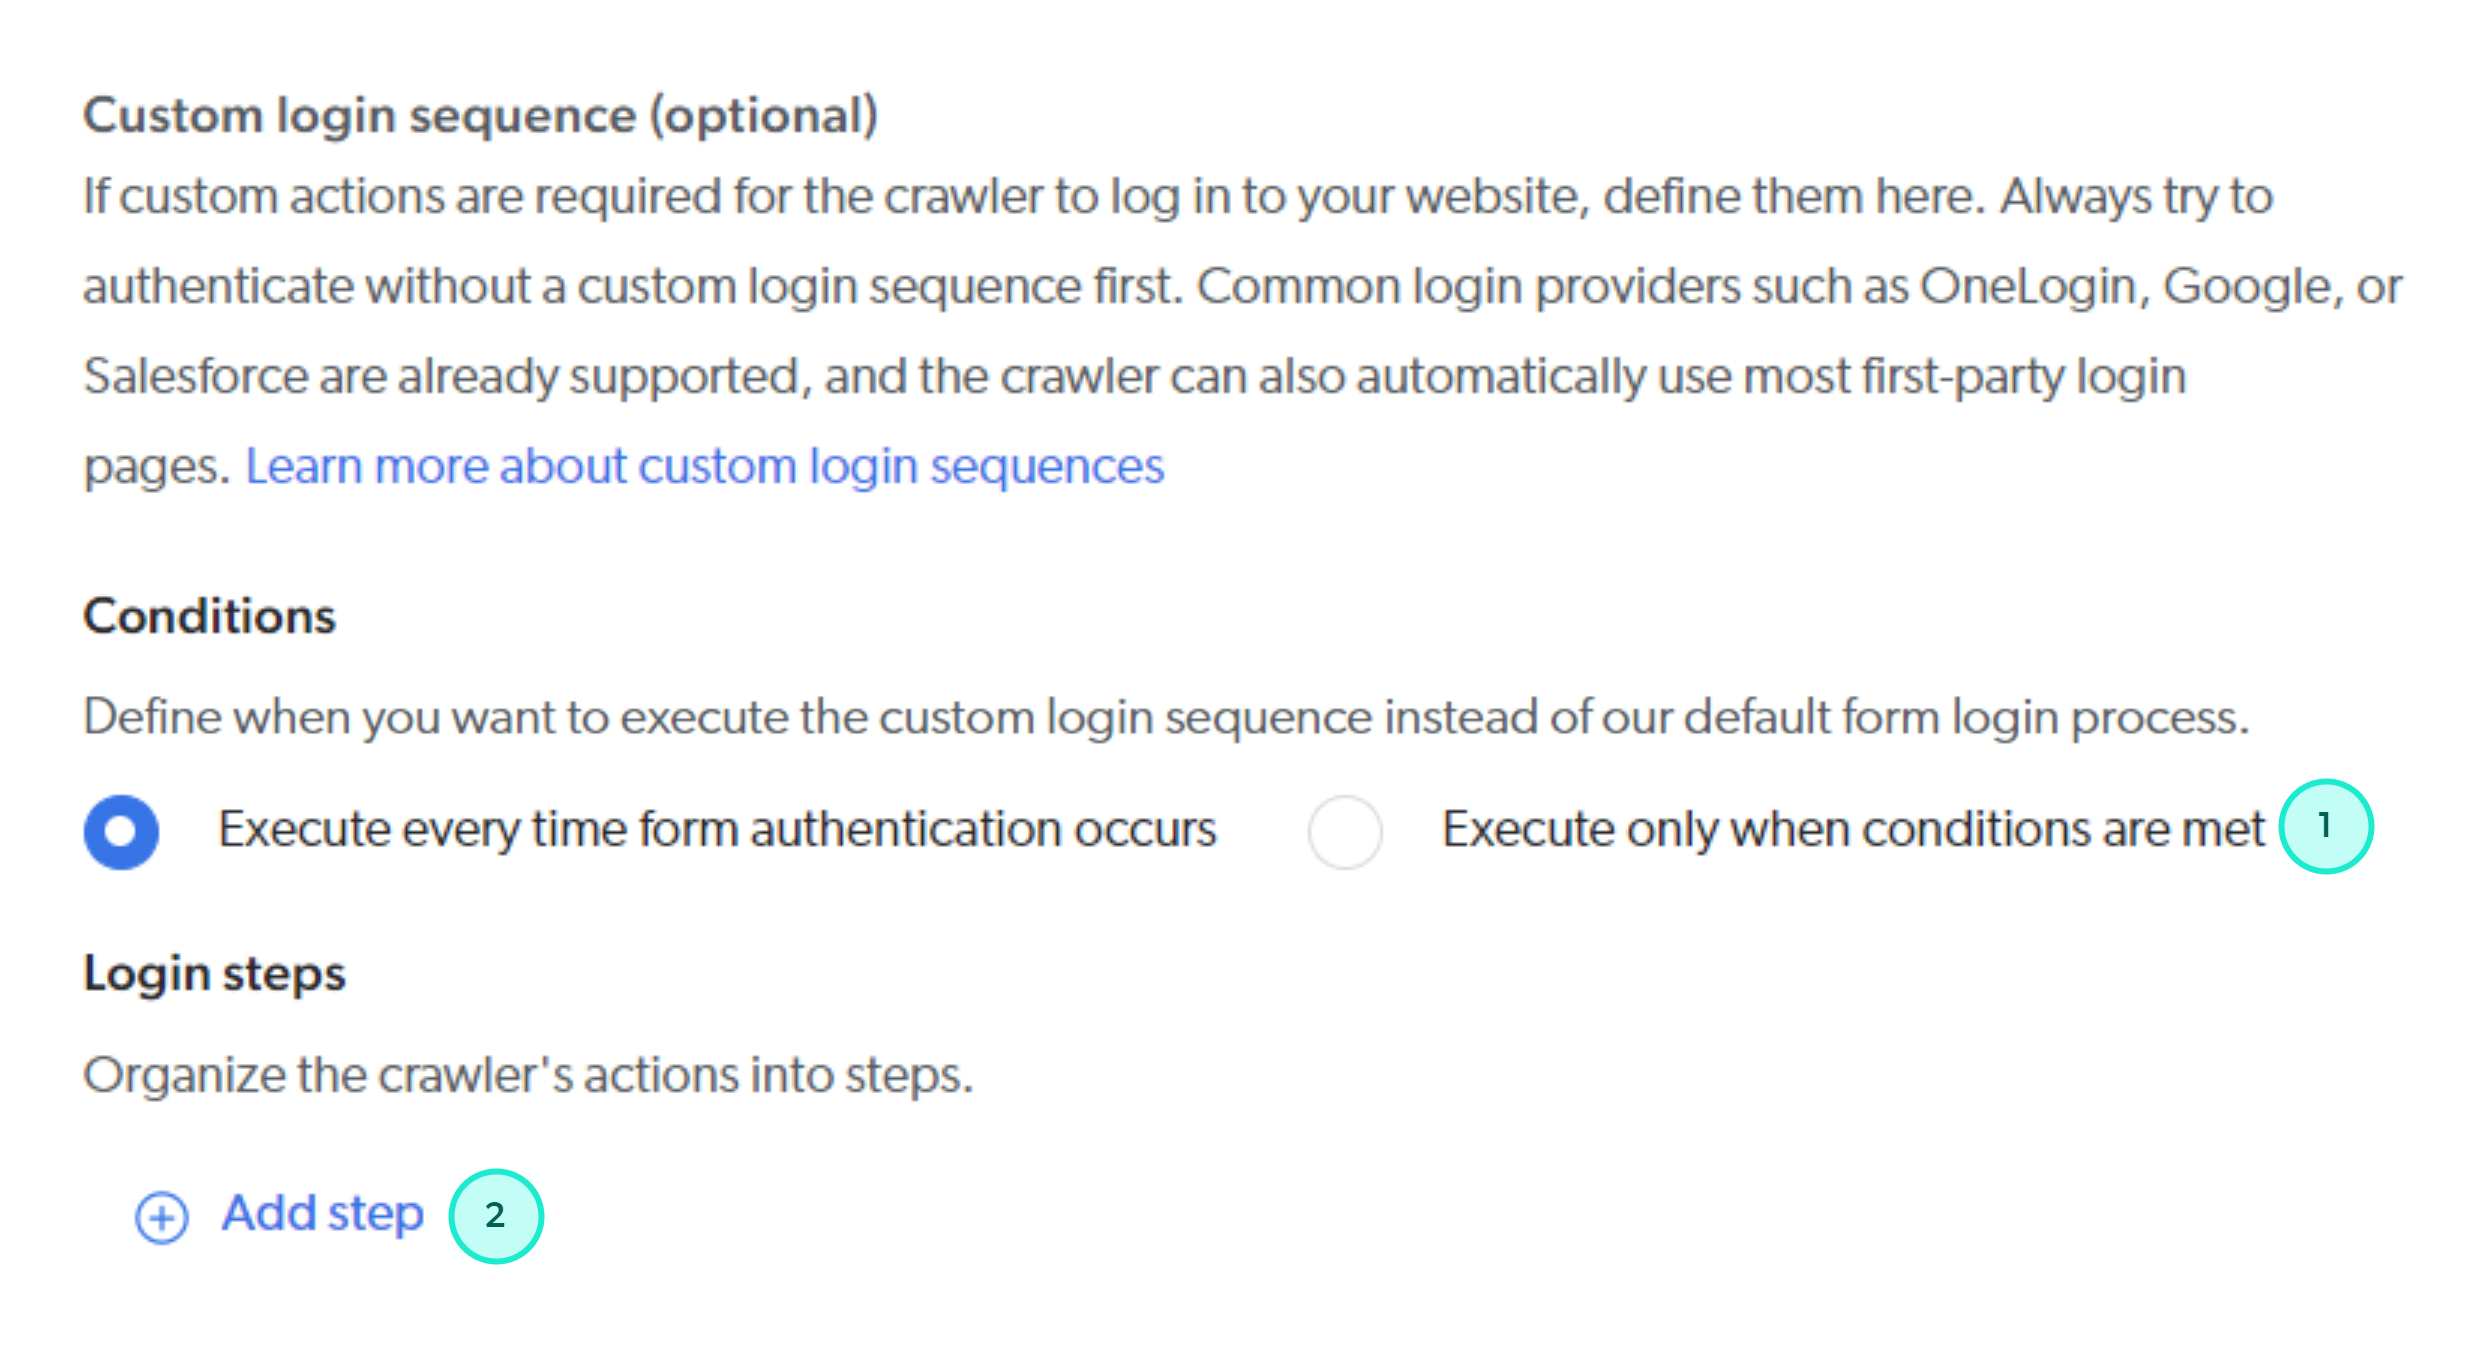 Add custom login sequence conditions and steps | Coveo